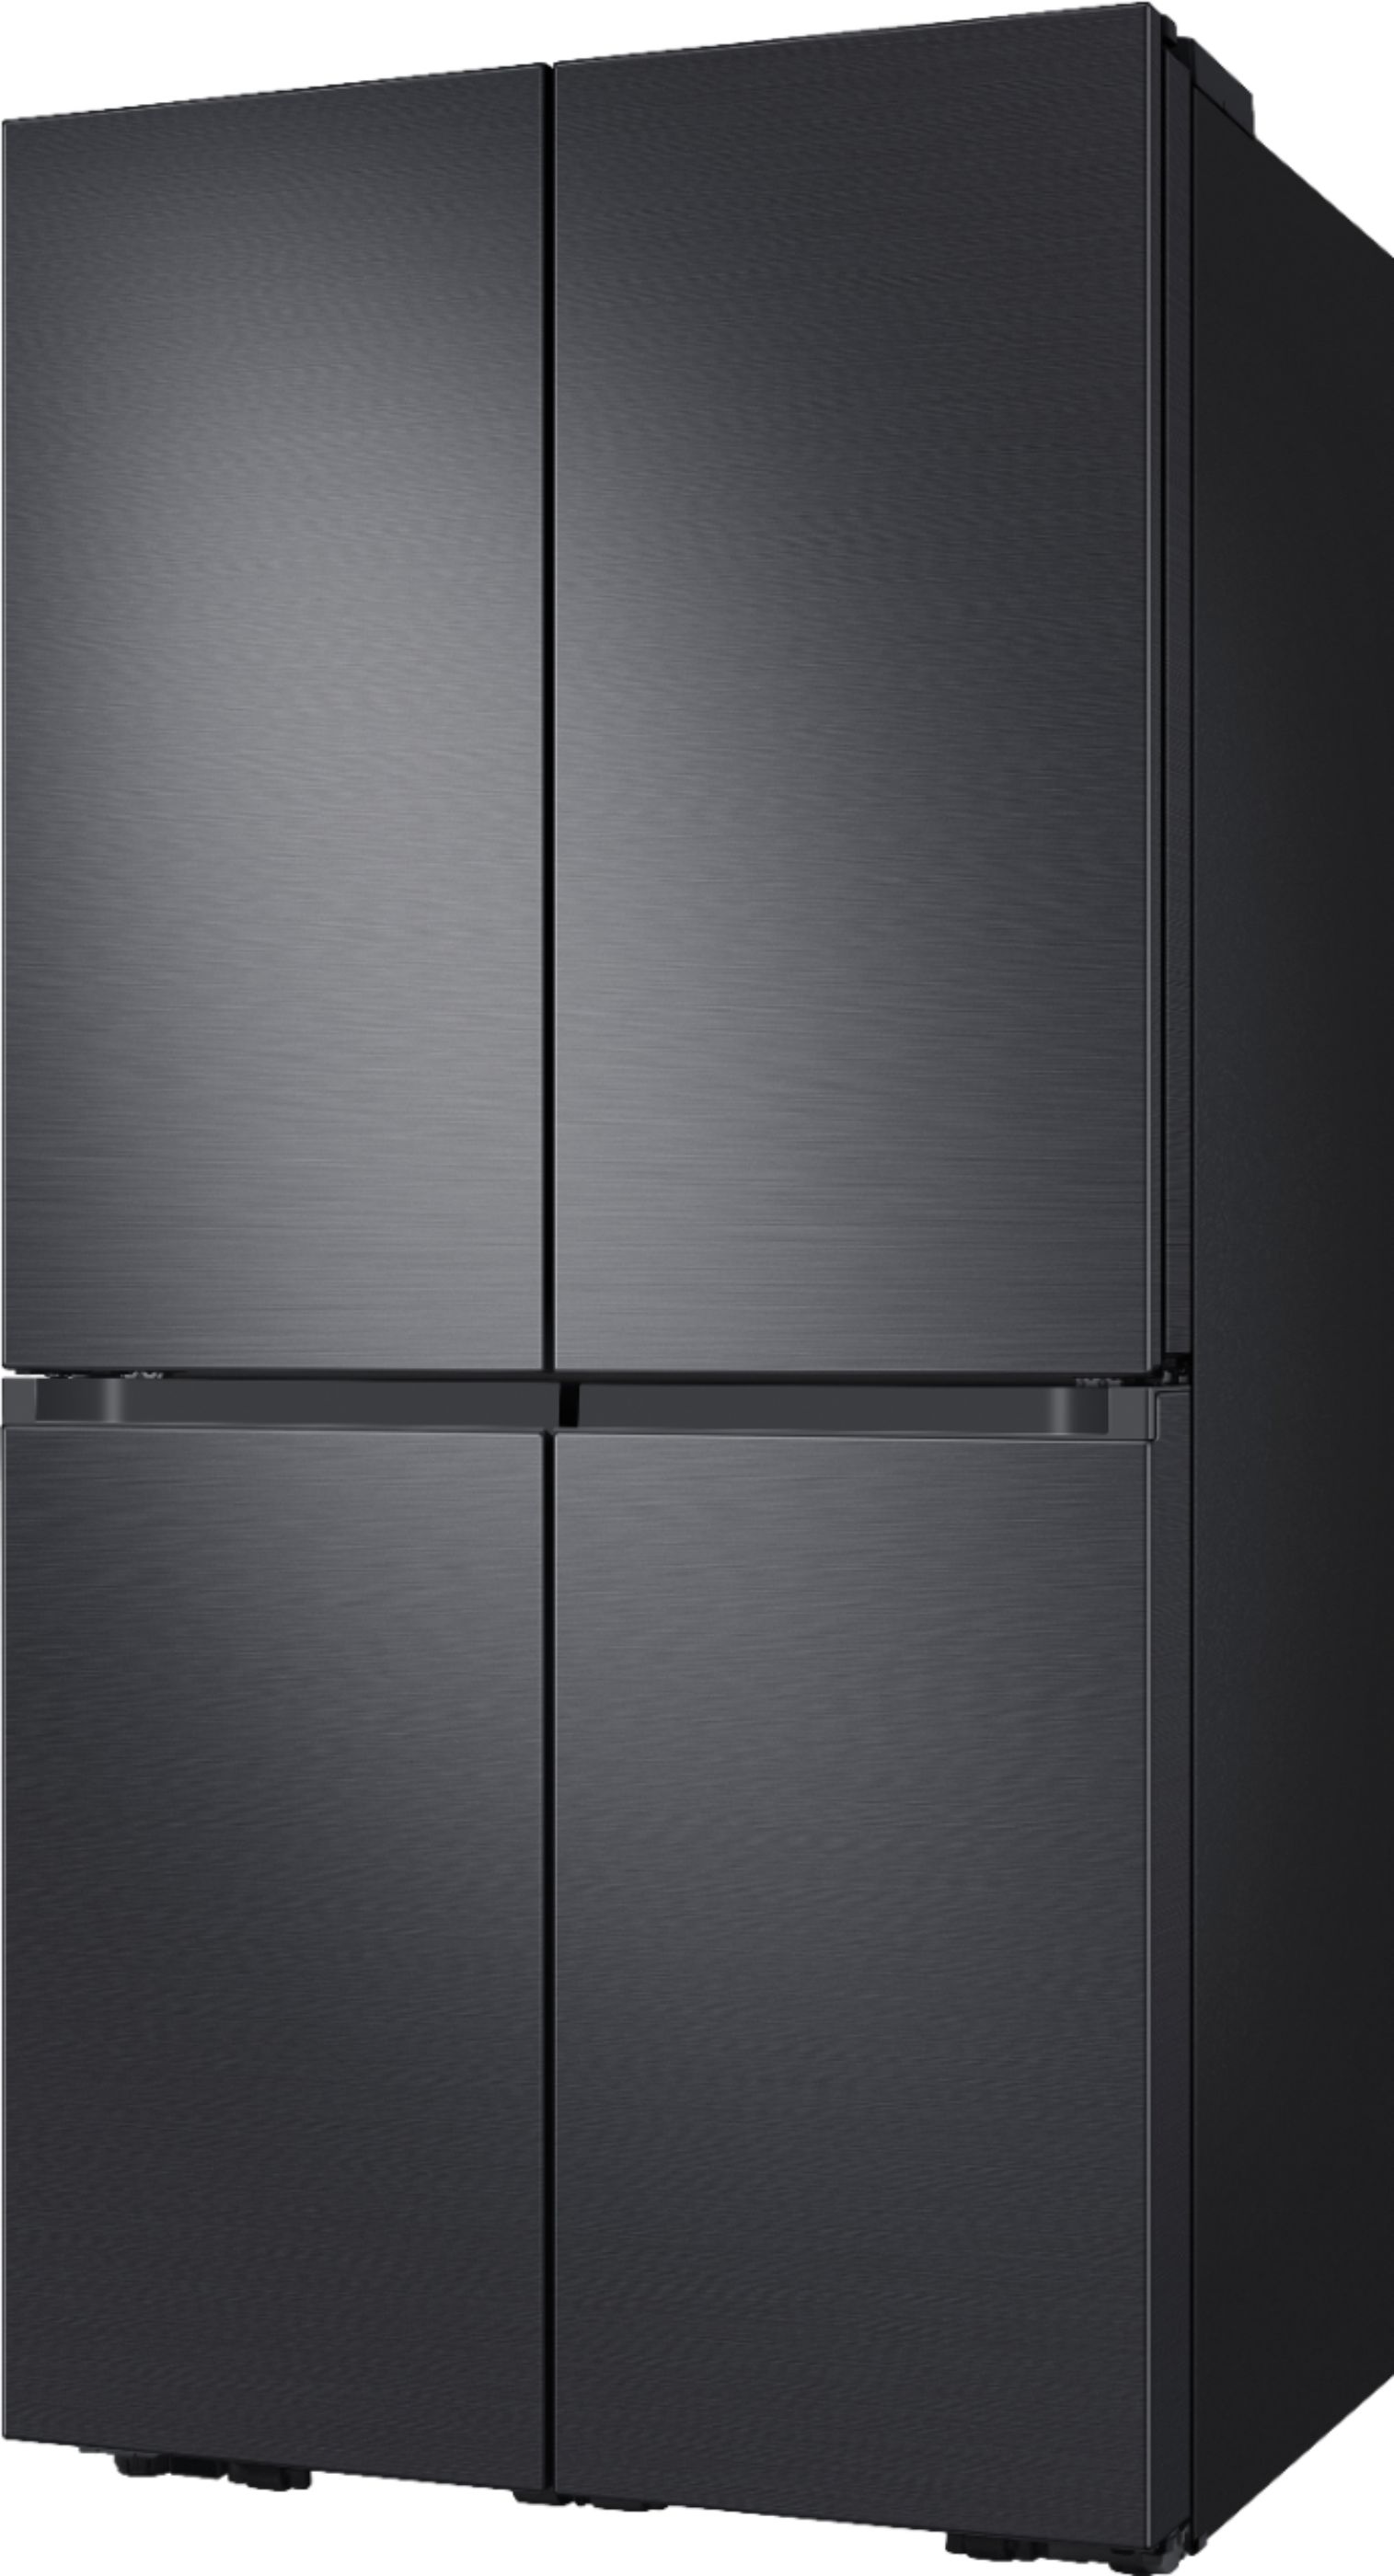 Angle View: Samsung - Bespoke 23 cu. ft. Counter Depth 4-Door French Door Refrigerator with AutoFill Water Pitcher - Stainless steel